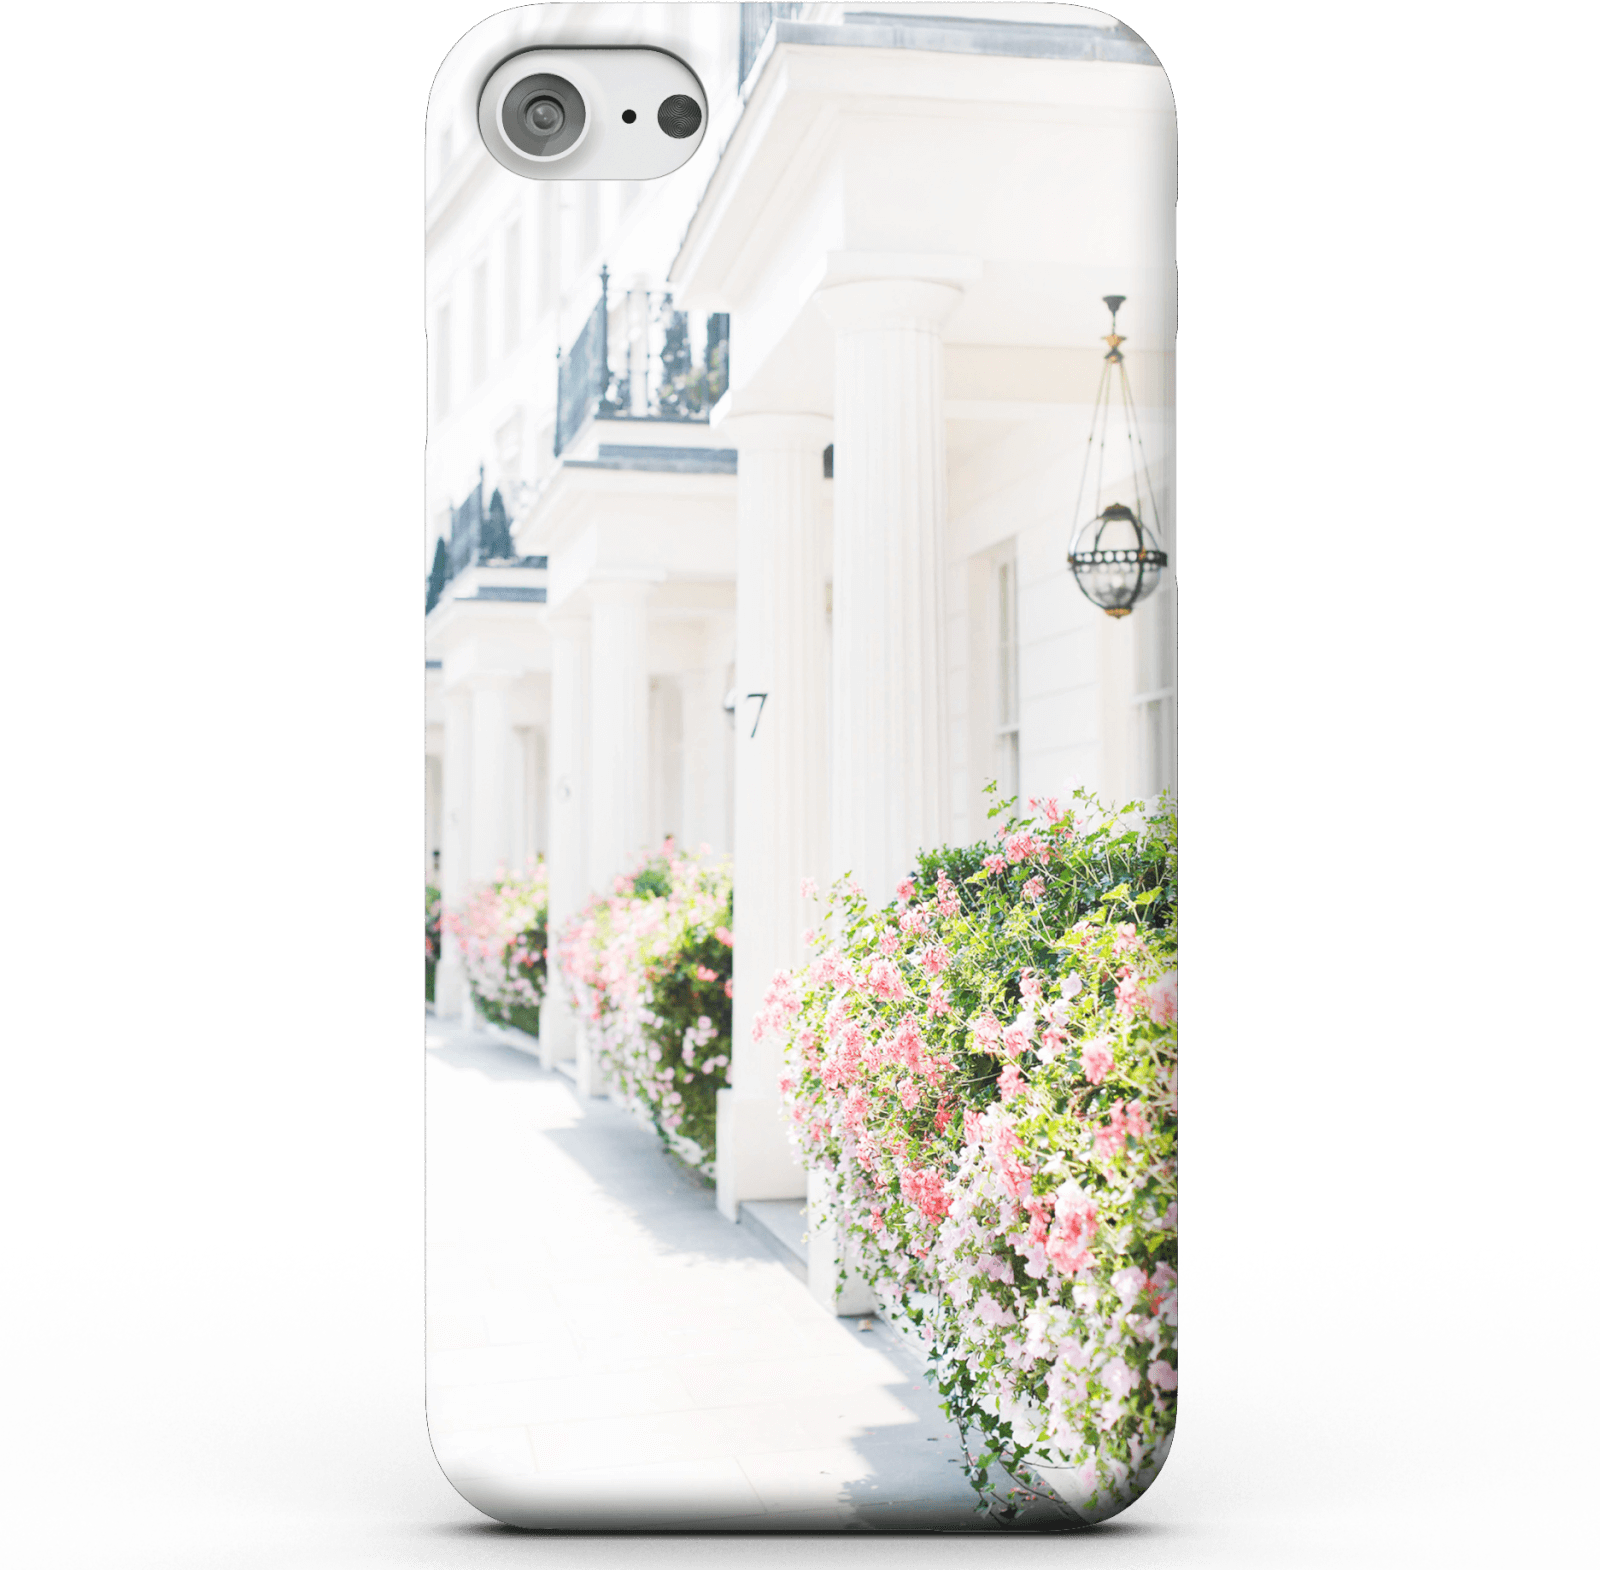 London Streets Phone Case for iPhone and Android - iPhone 5/5s - Snap Case - Matte